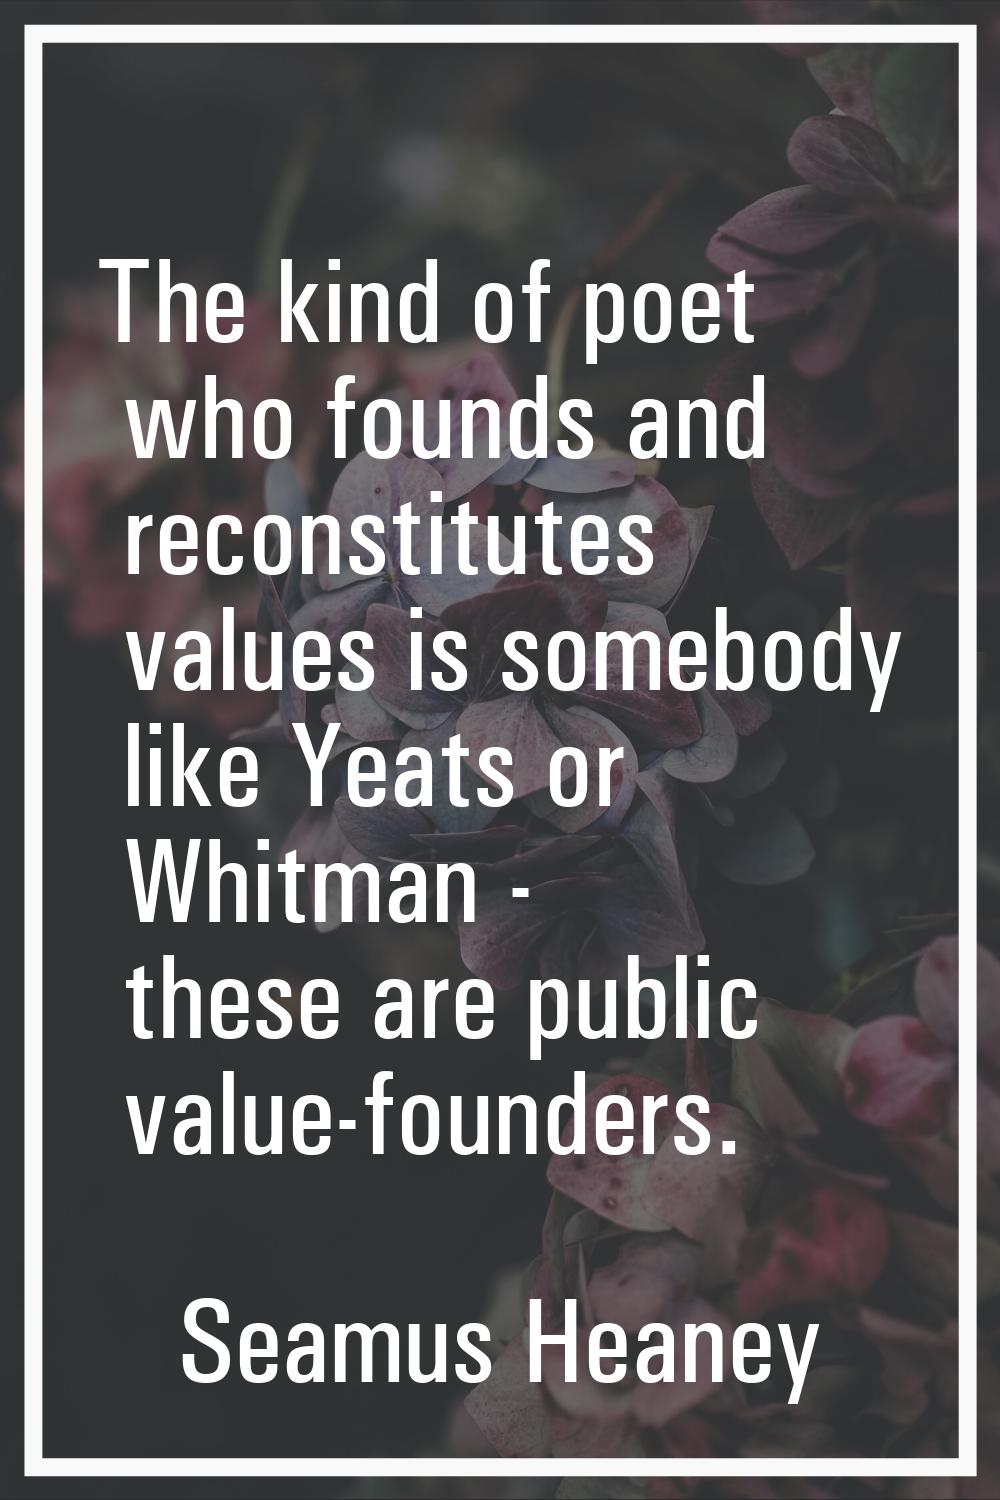 The kind of poet who founds and reconstitutes values is somebody like Yeats or Whitman - these are 